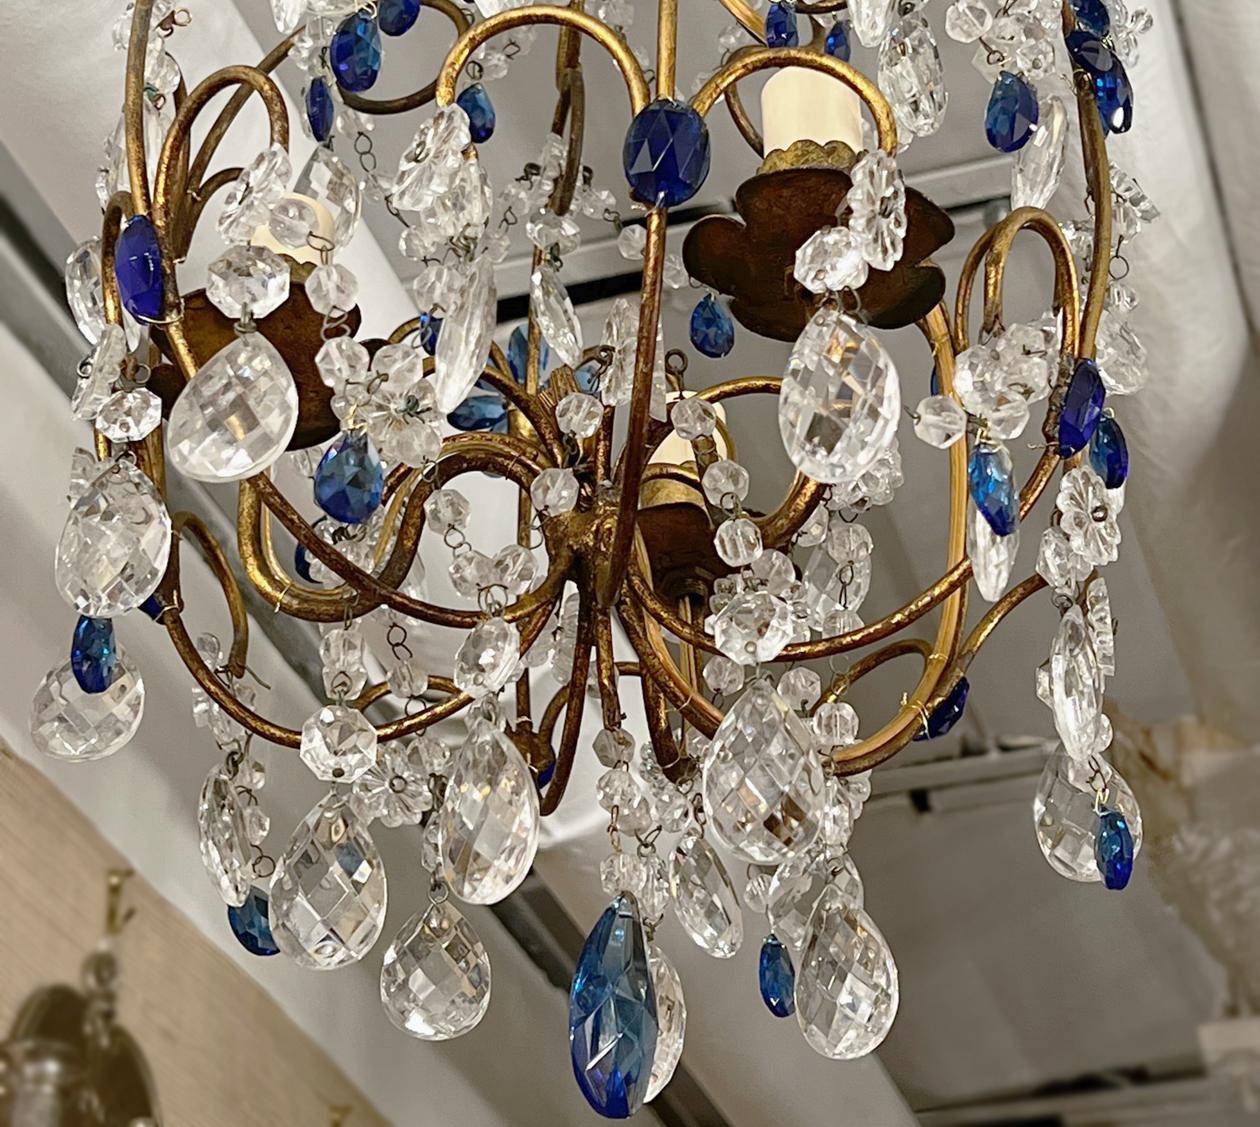 A circa 1950s gilt metal chandelier with blue beads and 3 lights.

Measurements:
Minimum drop: 24